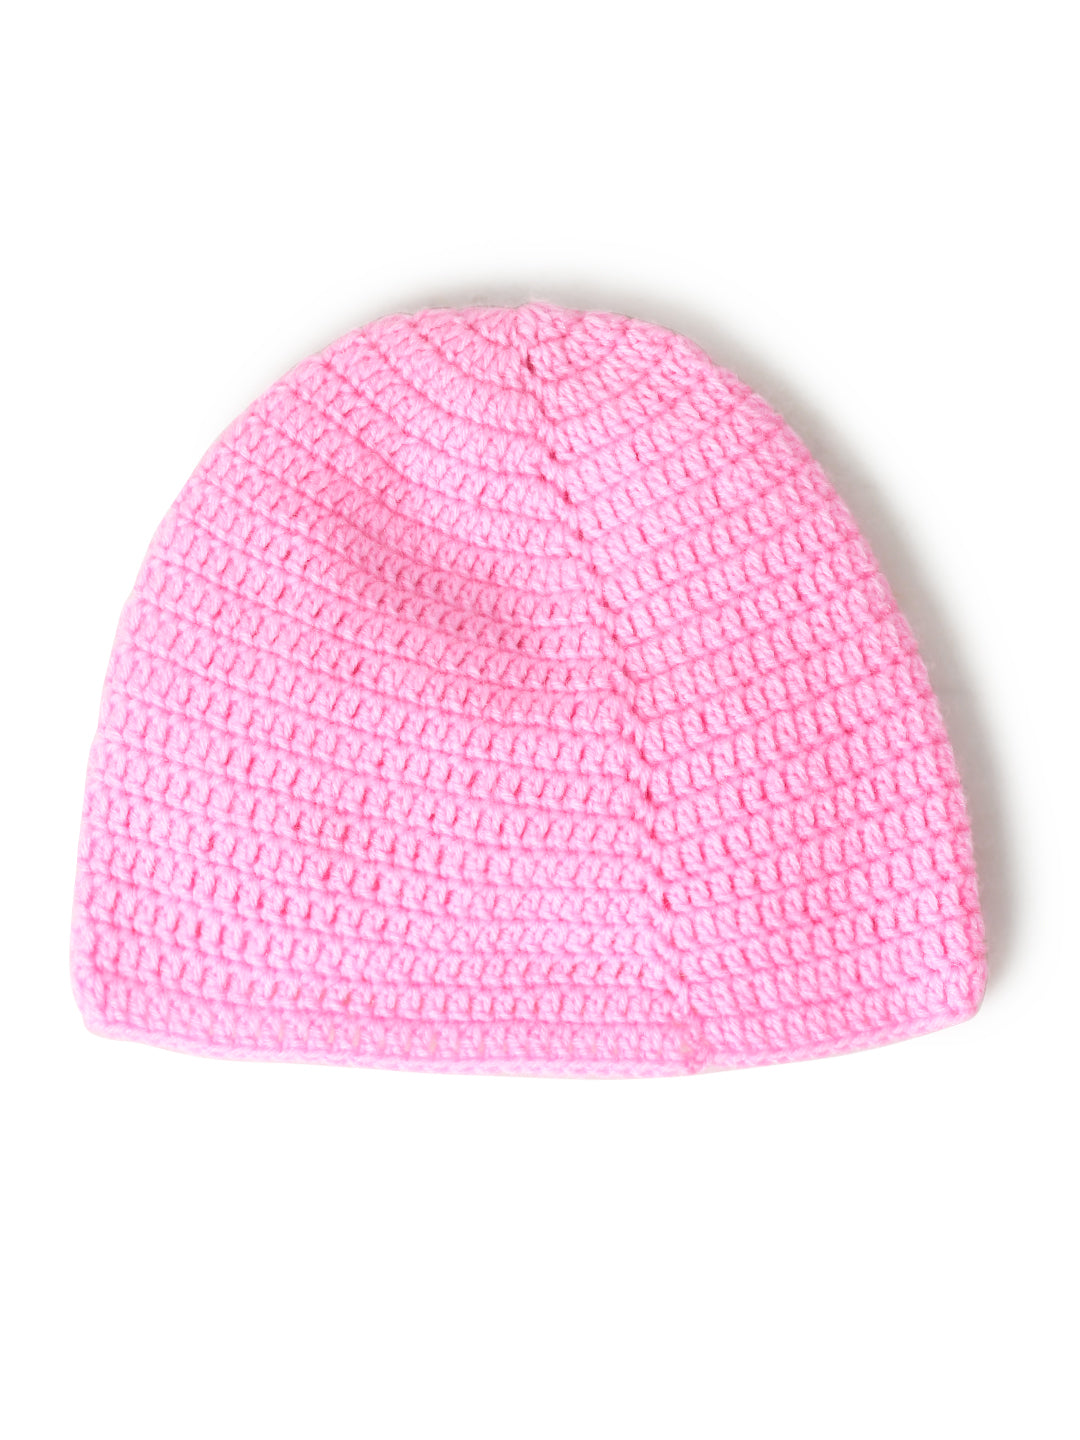 Pack of 2 White & Pink Woolen Cap for Kids